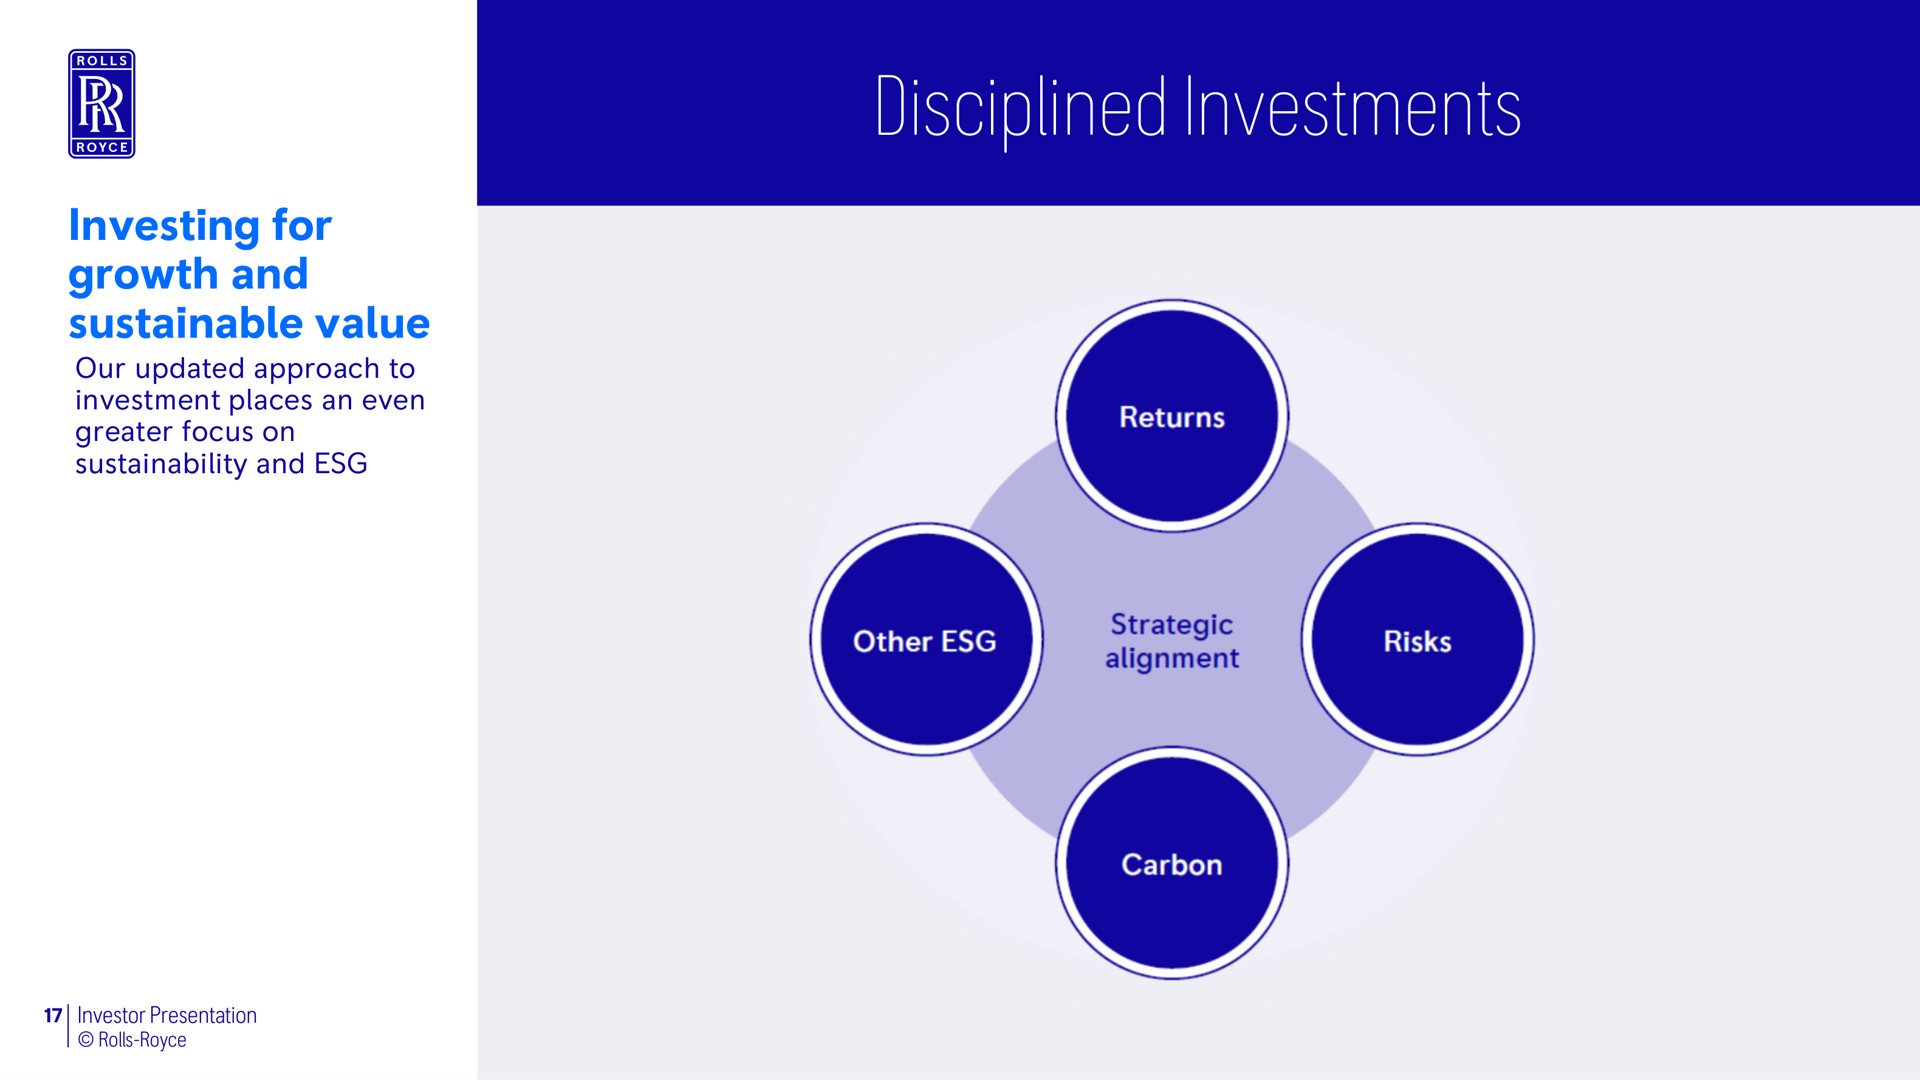 by the covid pandemic disciplined investments investing for growth and sustainable value | Rolls-Royce Holdings